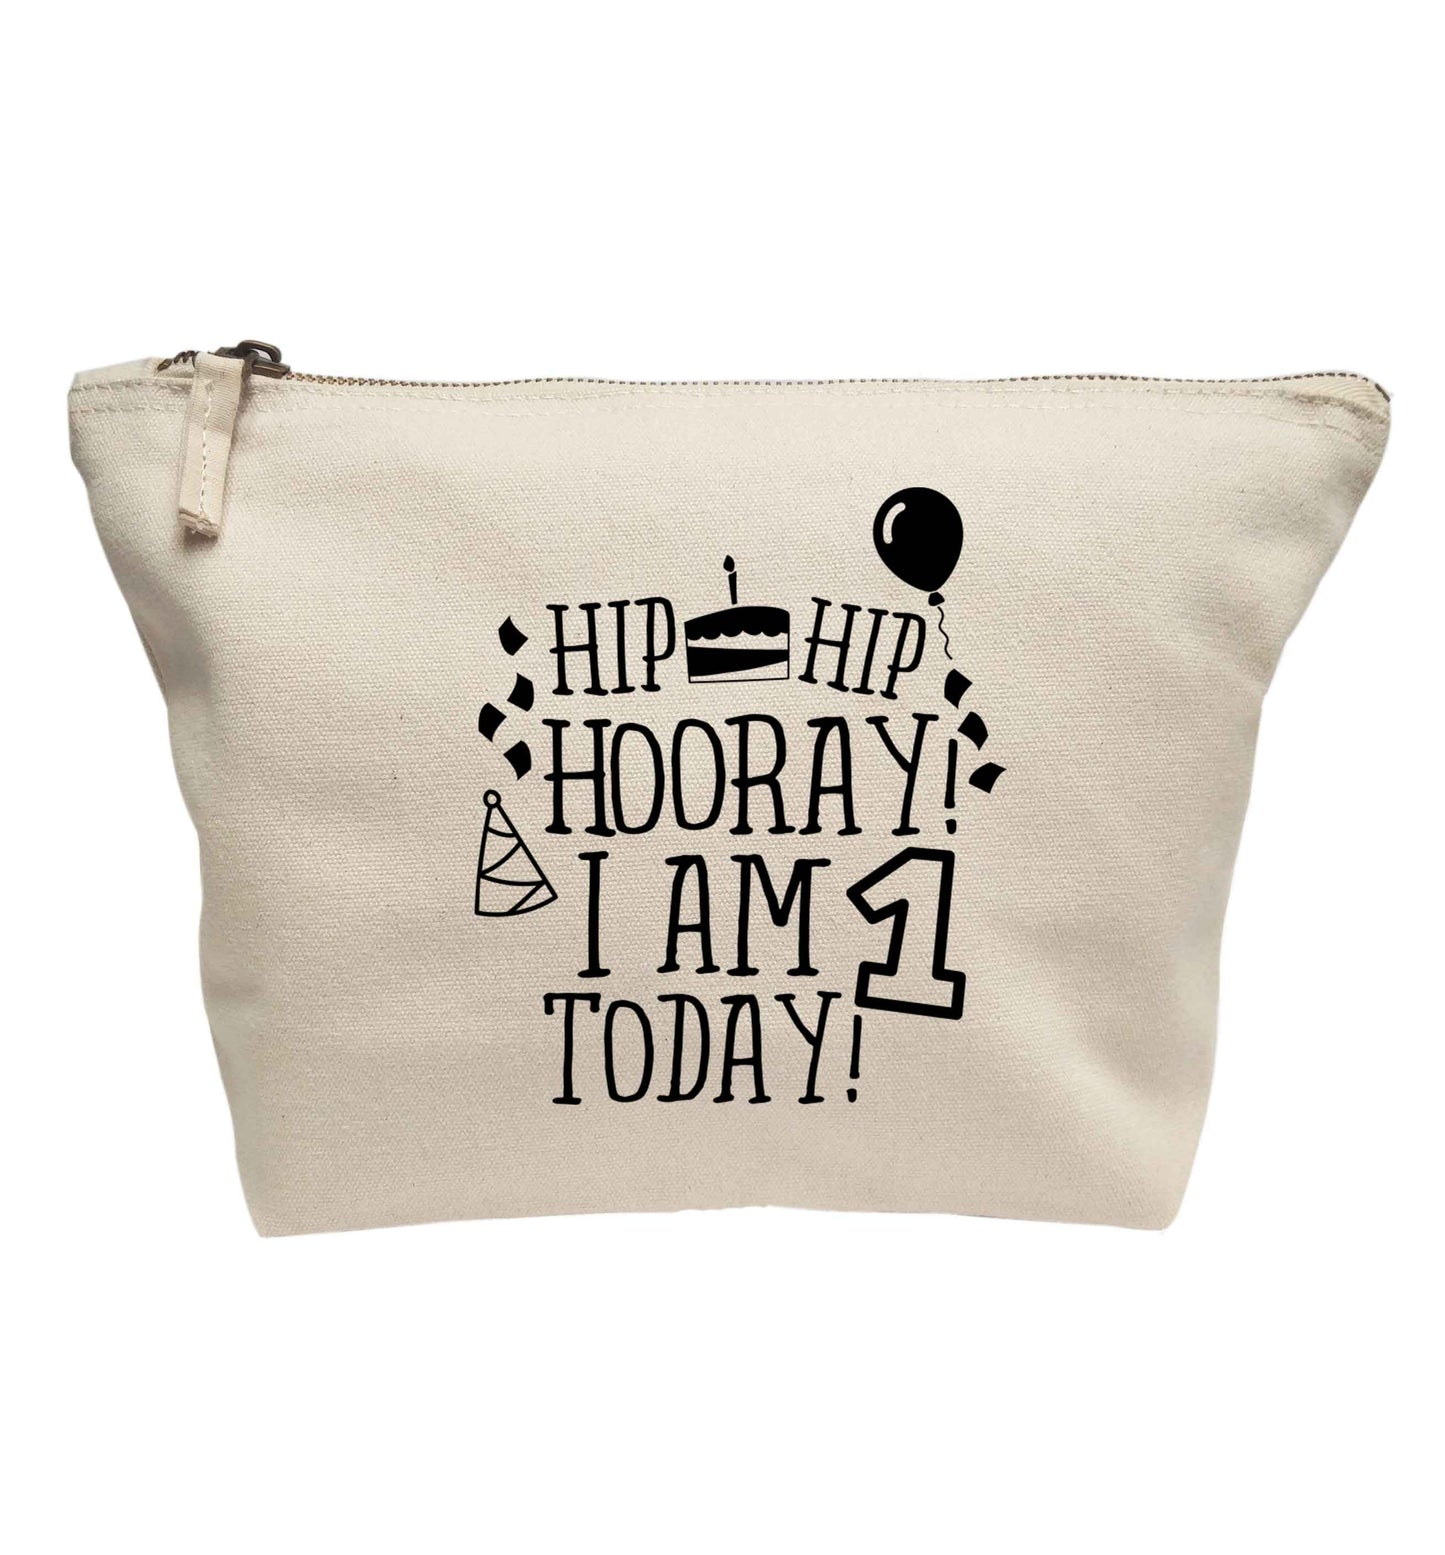 Hip Hip Hooray you're two today! | Makeup / wash bag